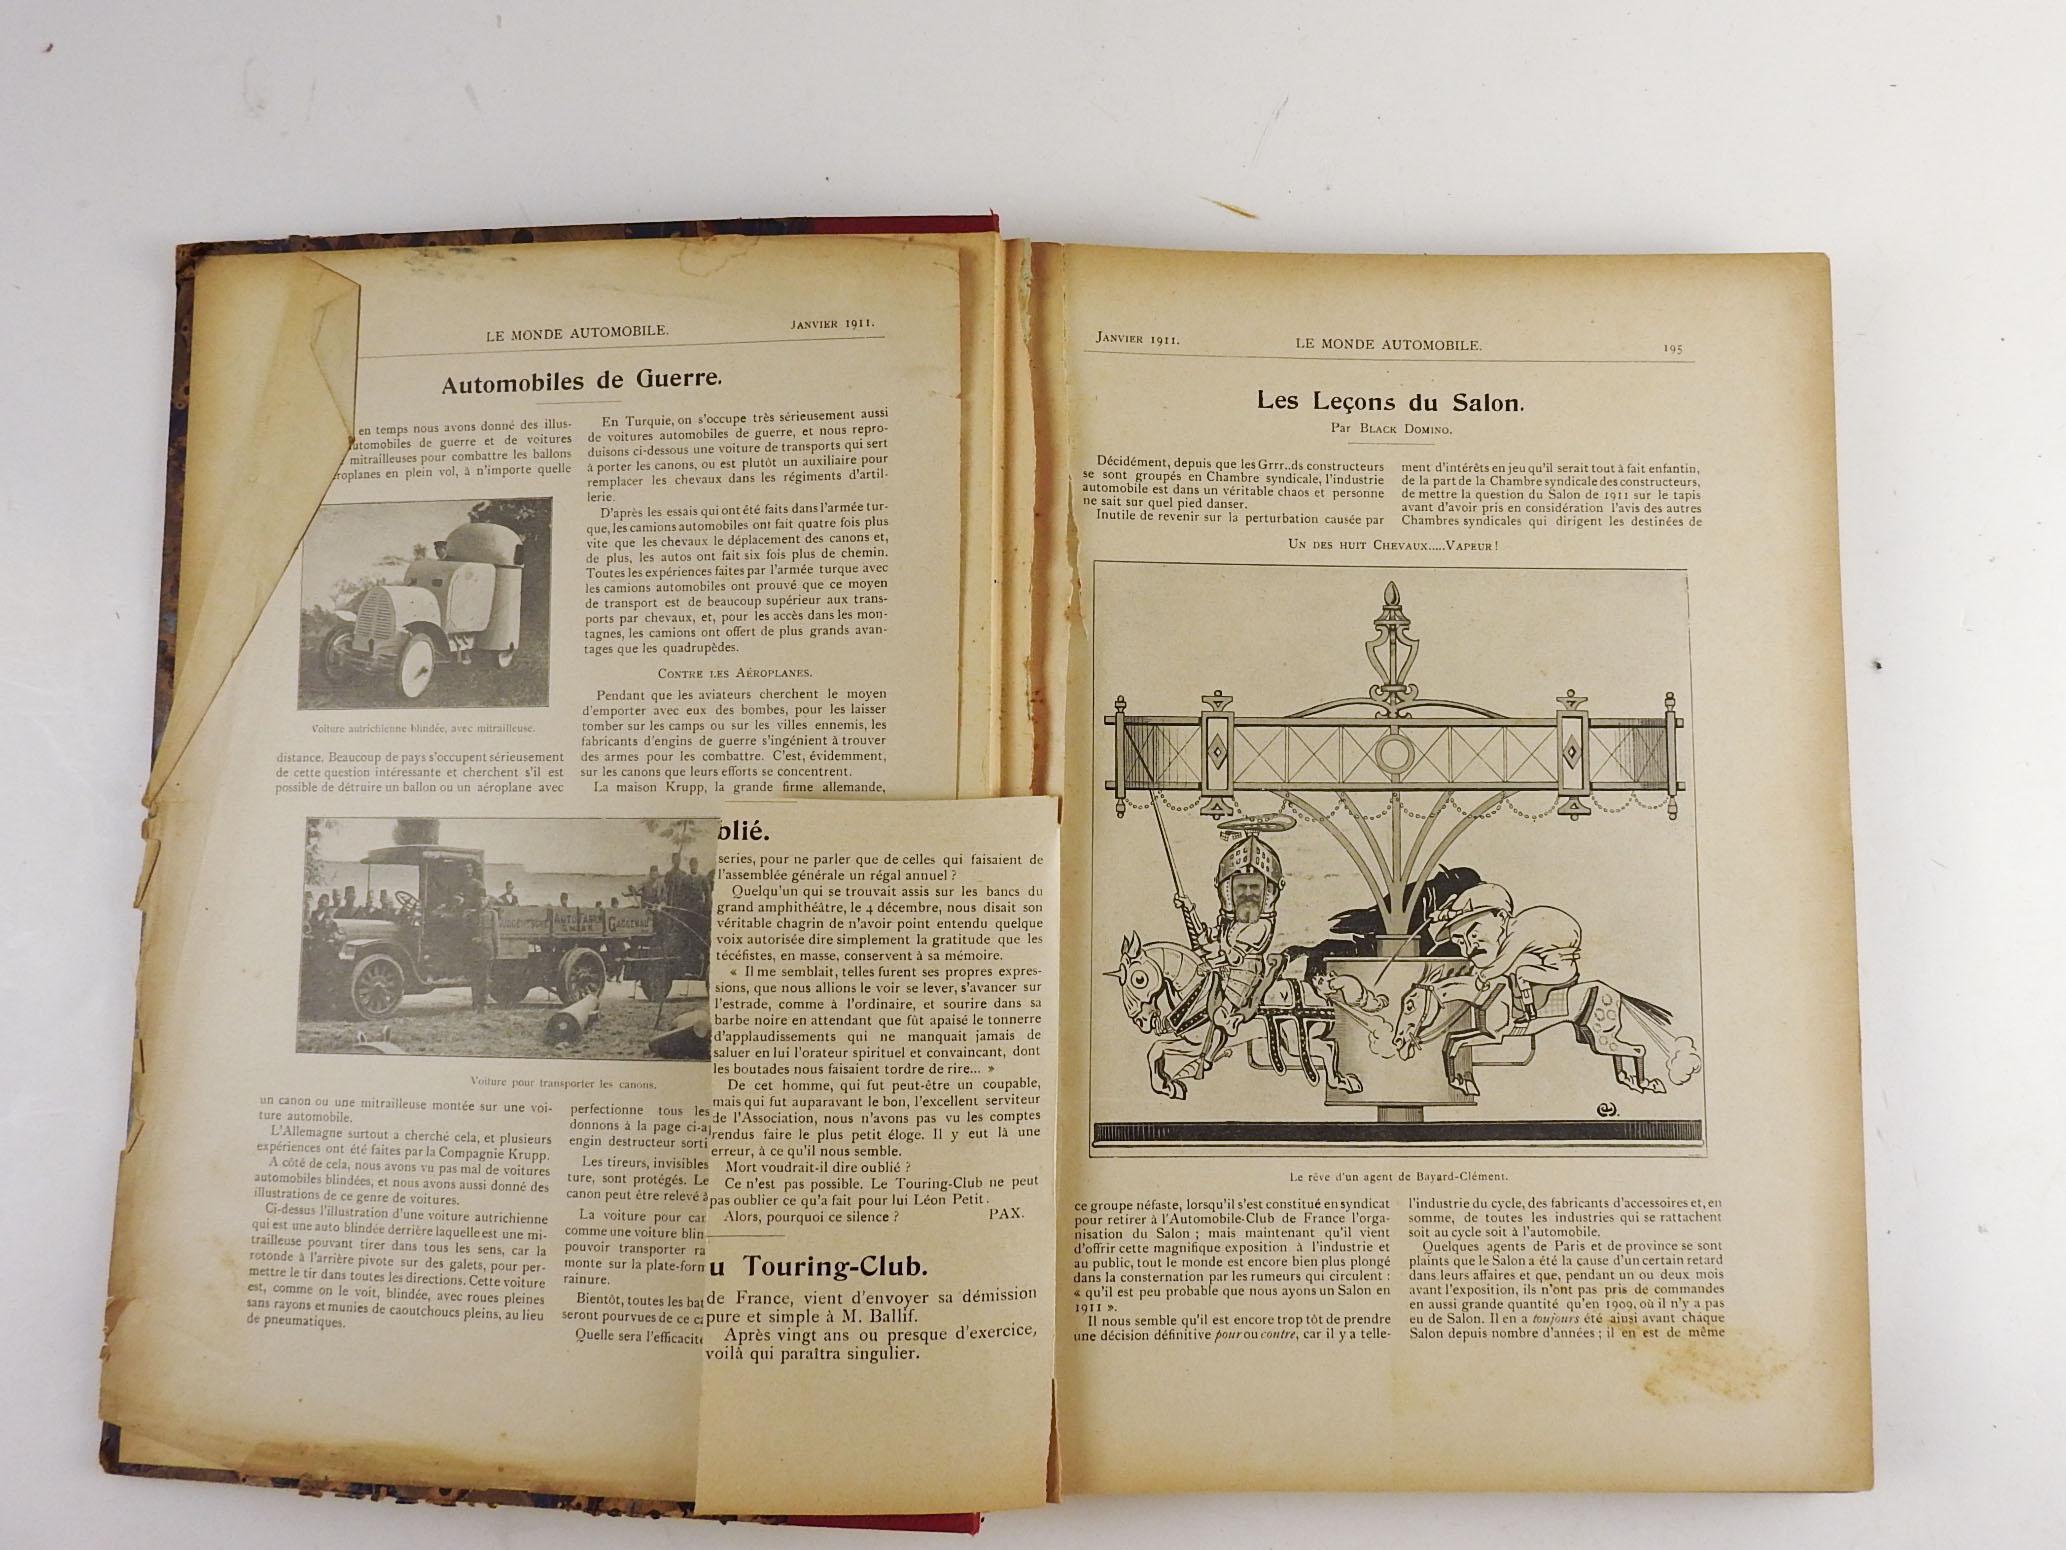 Rare full year 1911 bound volumes of Le Monde Automobile magazines.  French language magazine published for automobile, bicycle and aviation enthusiasts.  Tons of advertising, illustrations, many varied articles on drivers, pilots, races,